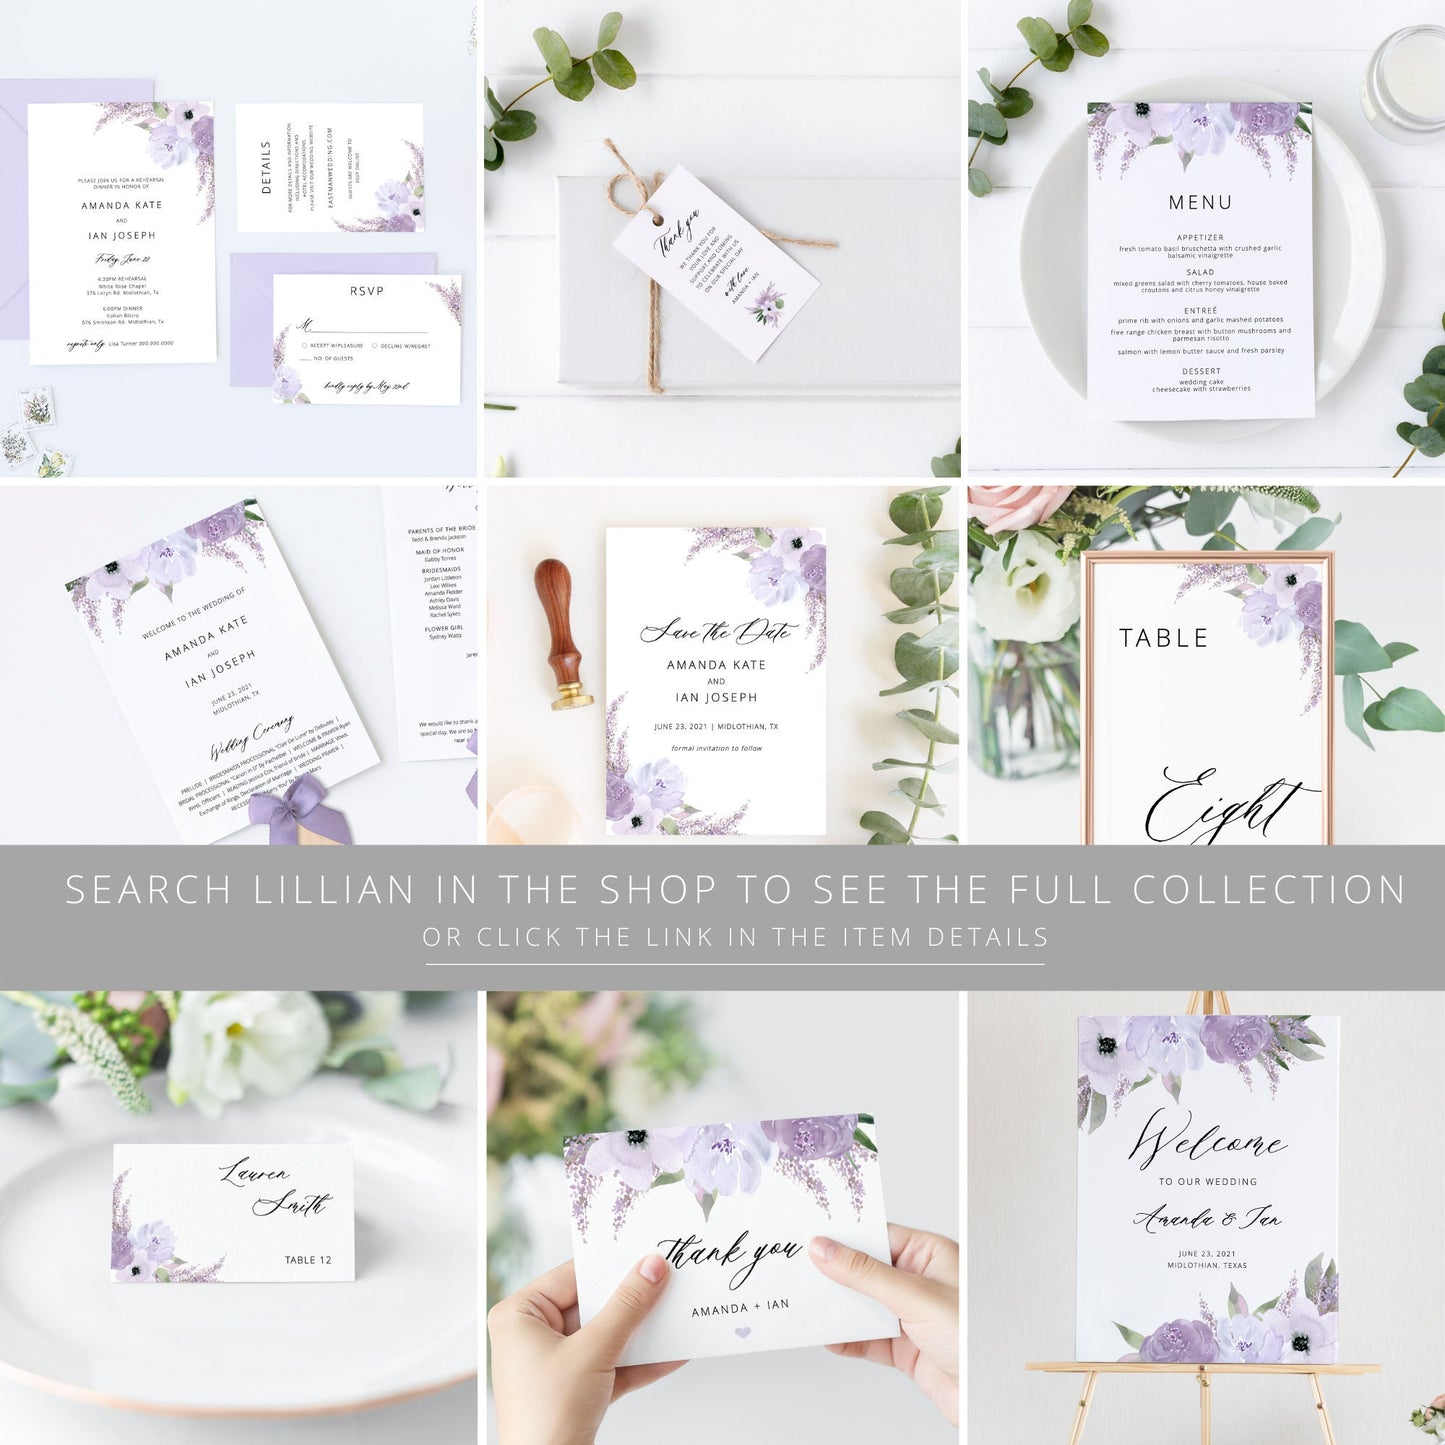 Editable Custom Wedding Sign Floral Lavender Wedding Sign Kit Create Unlimited Signs 8x10 and 10x8 Template